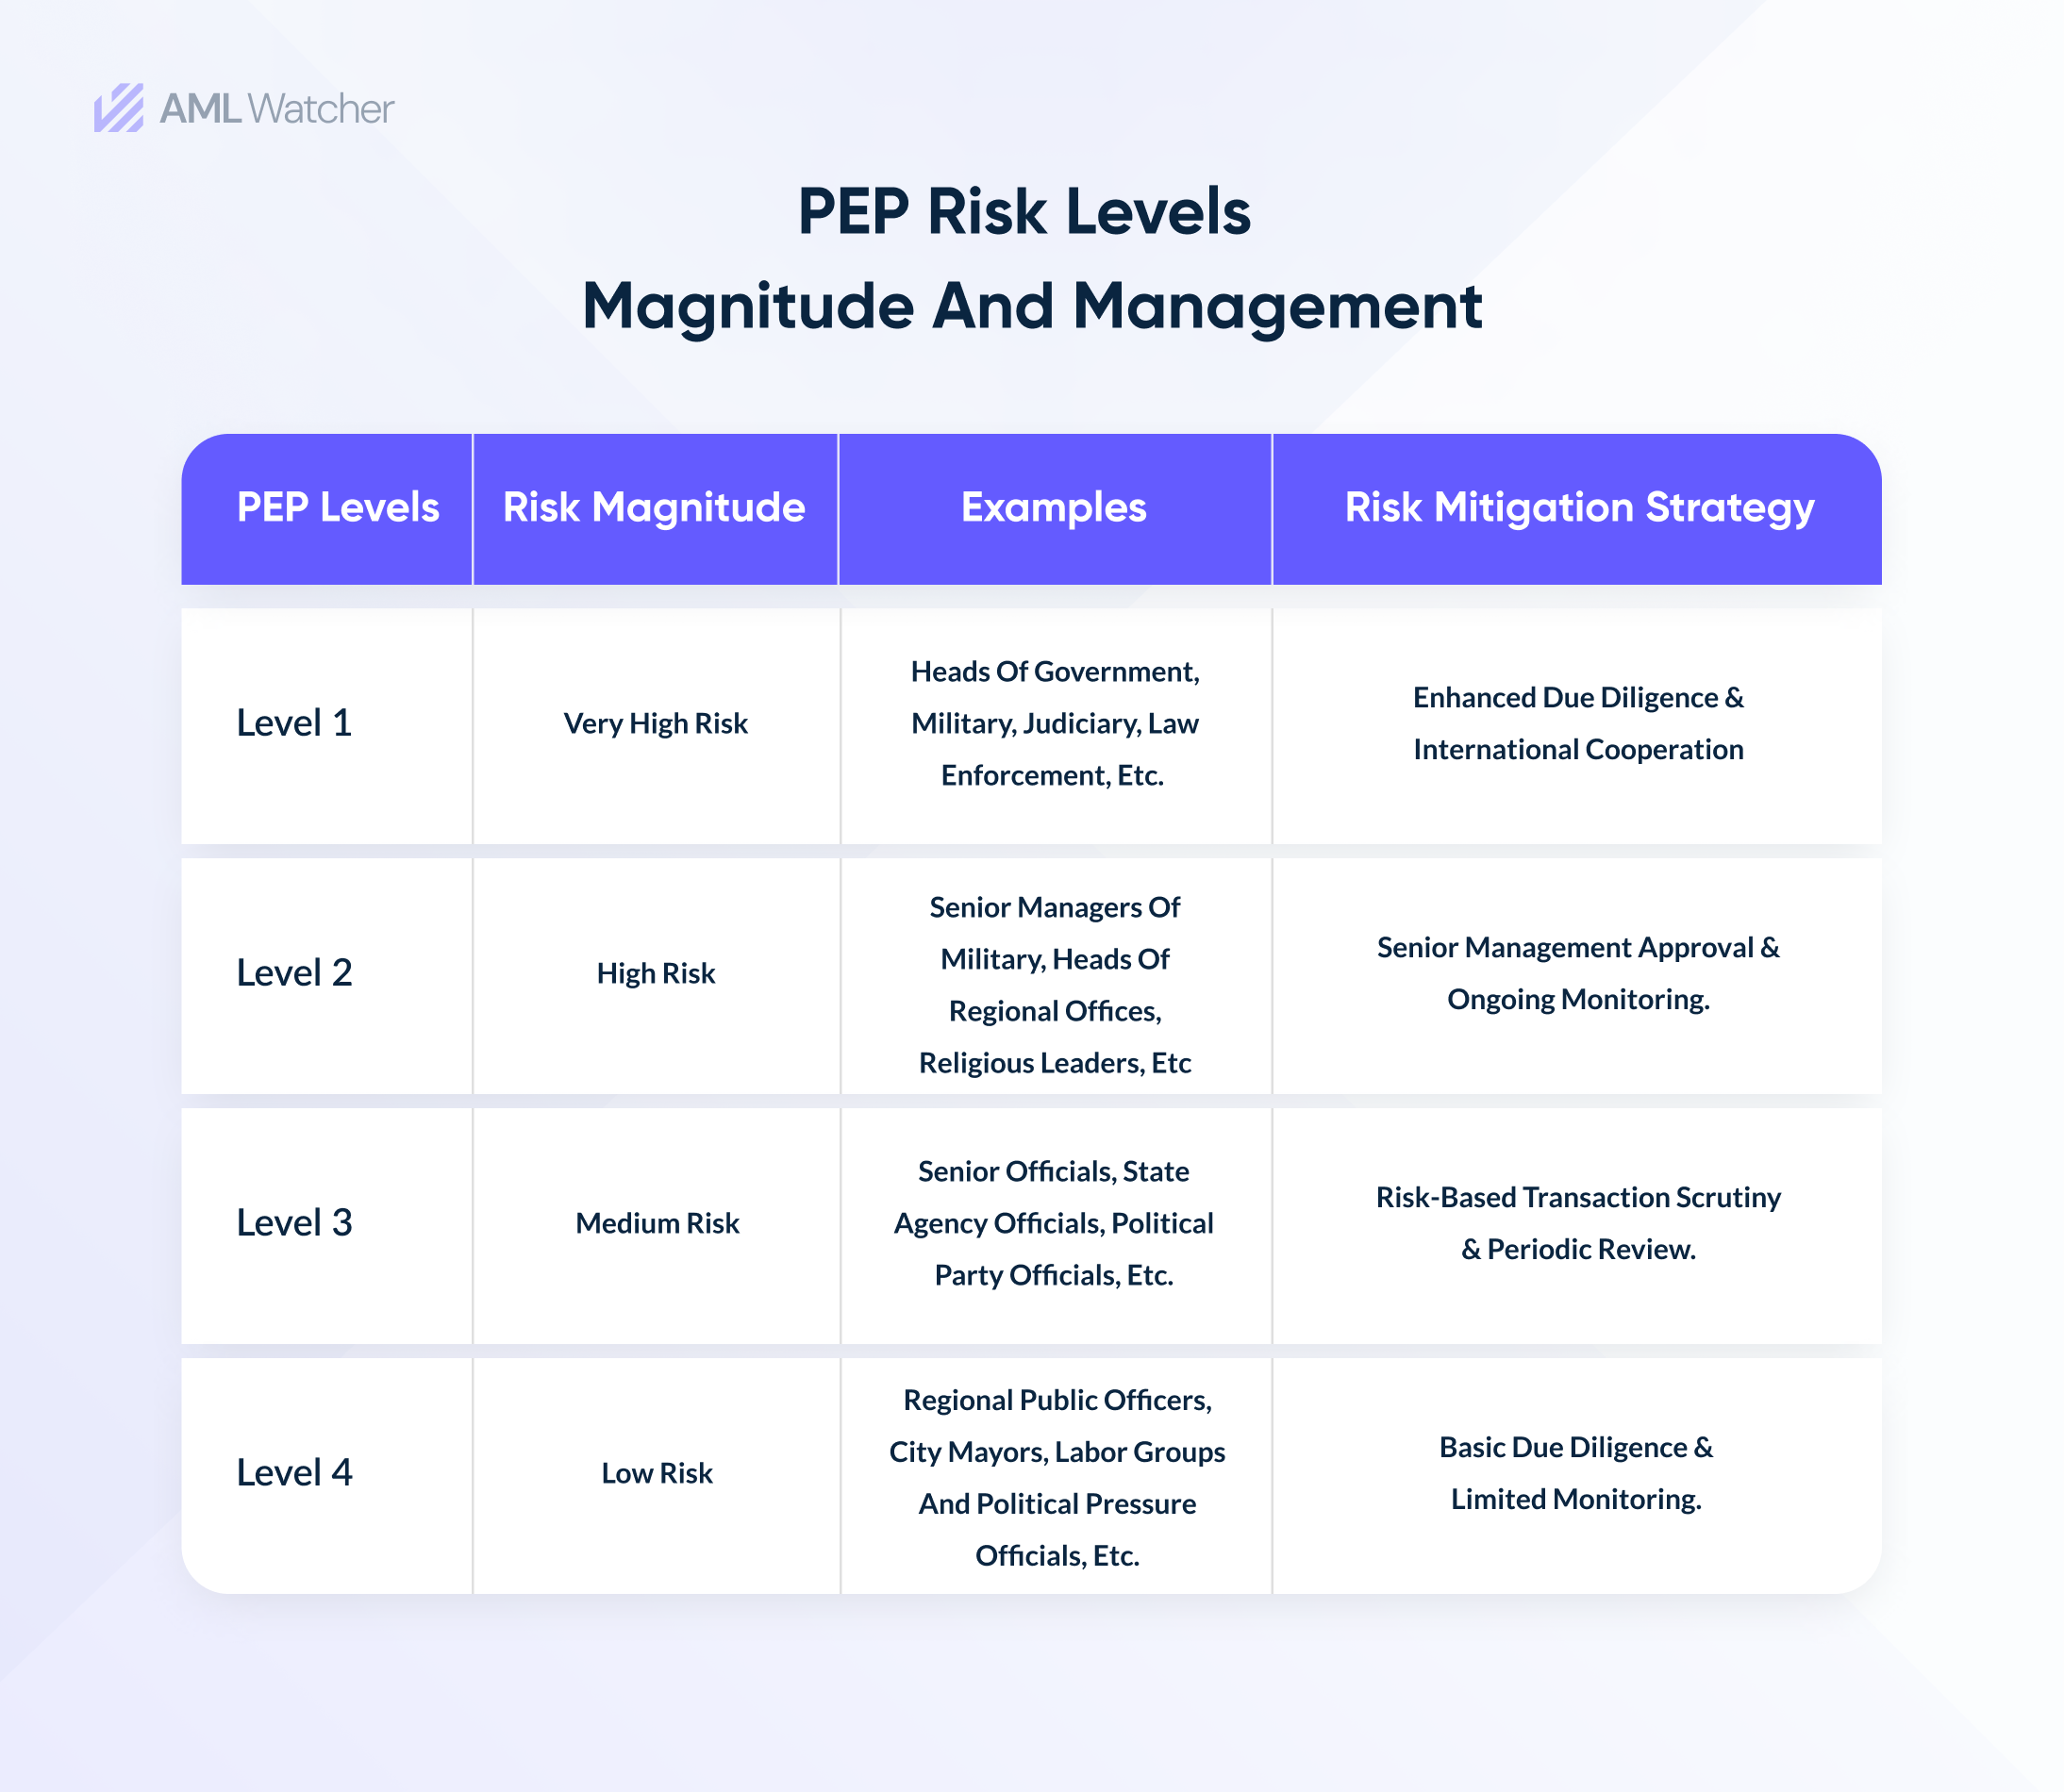 the featured image shows the PEP risk levels and relevant examples.